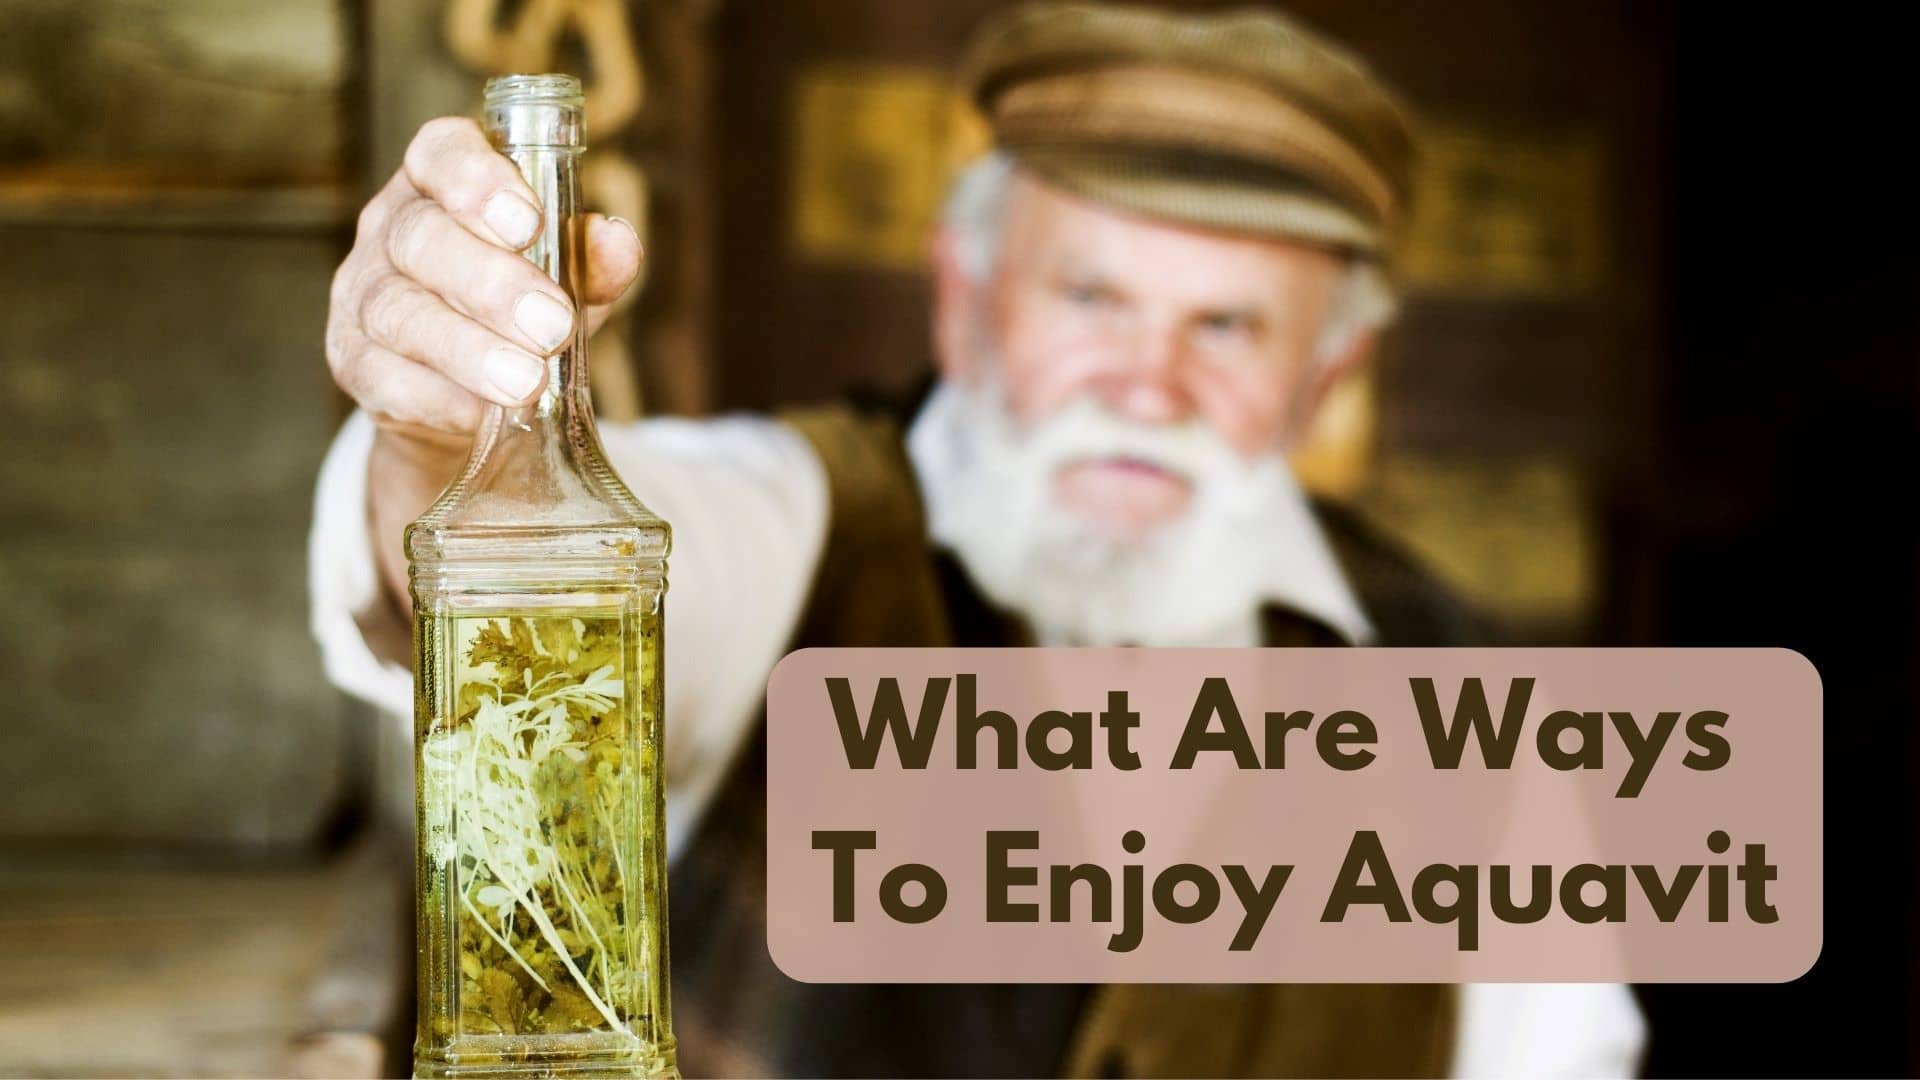 What Are Some Recommended Ways To Enjoy Aquavit?